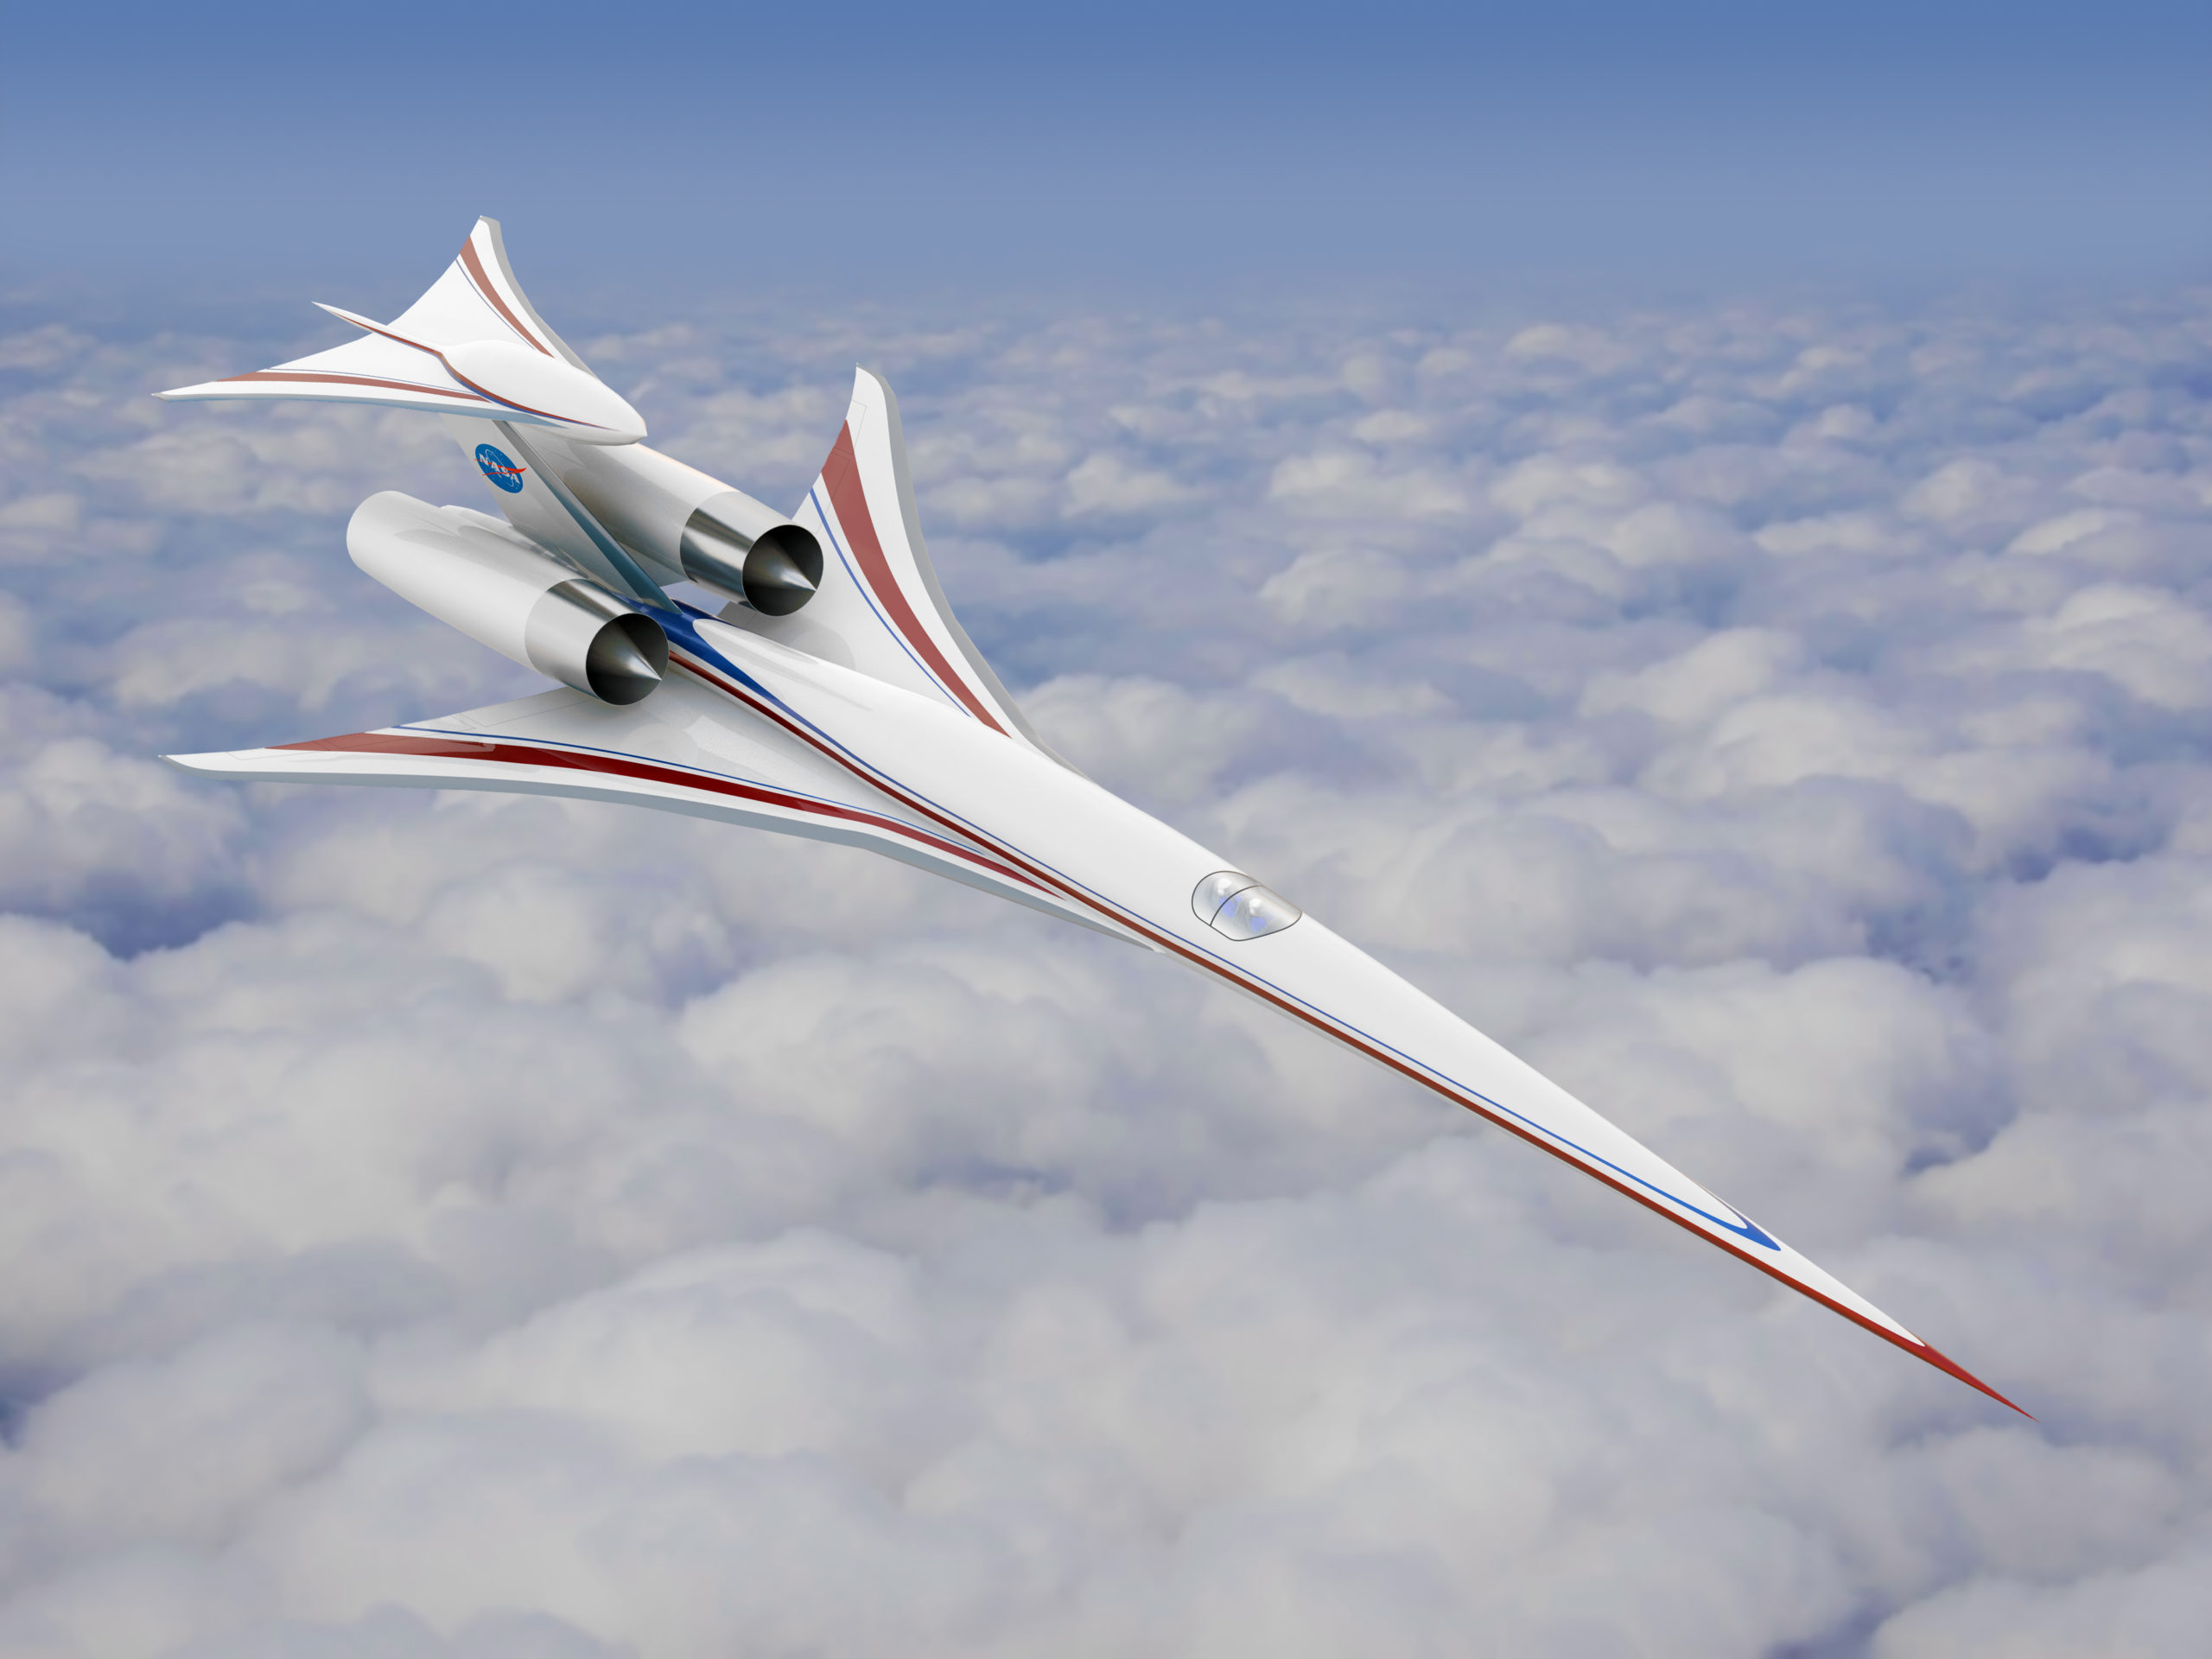 These Are NASA’s Coolest And Strangest Aeroplanes Of The Future